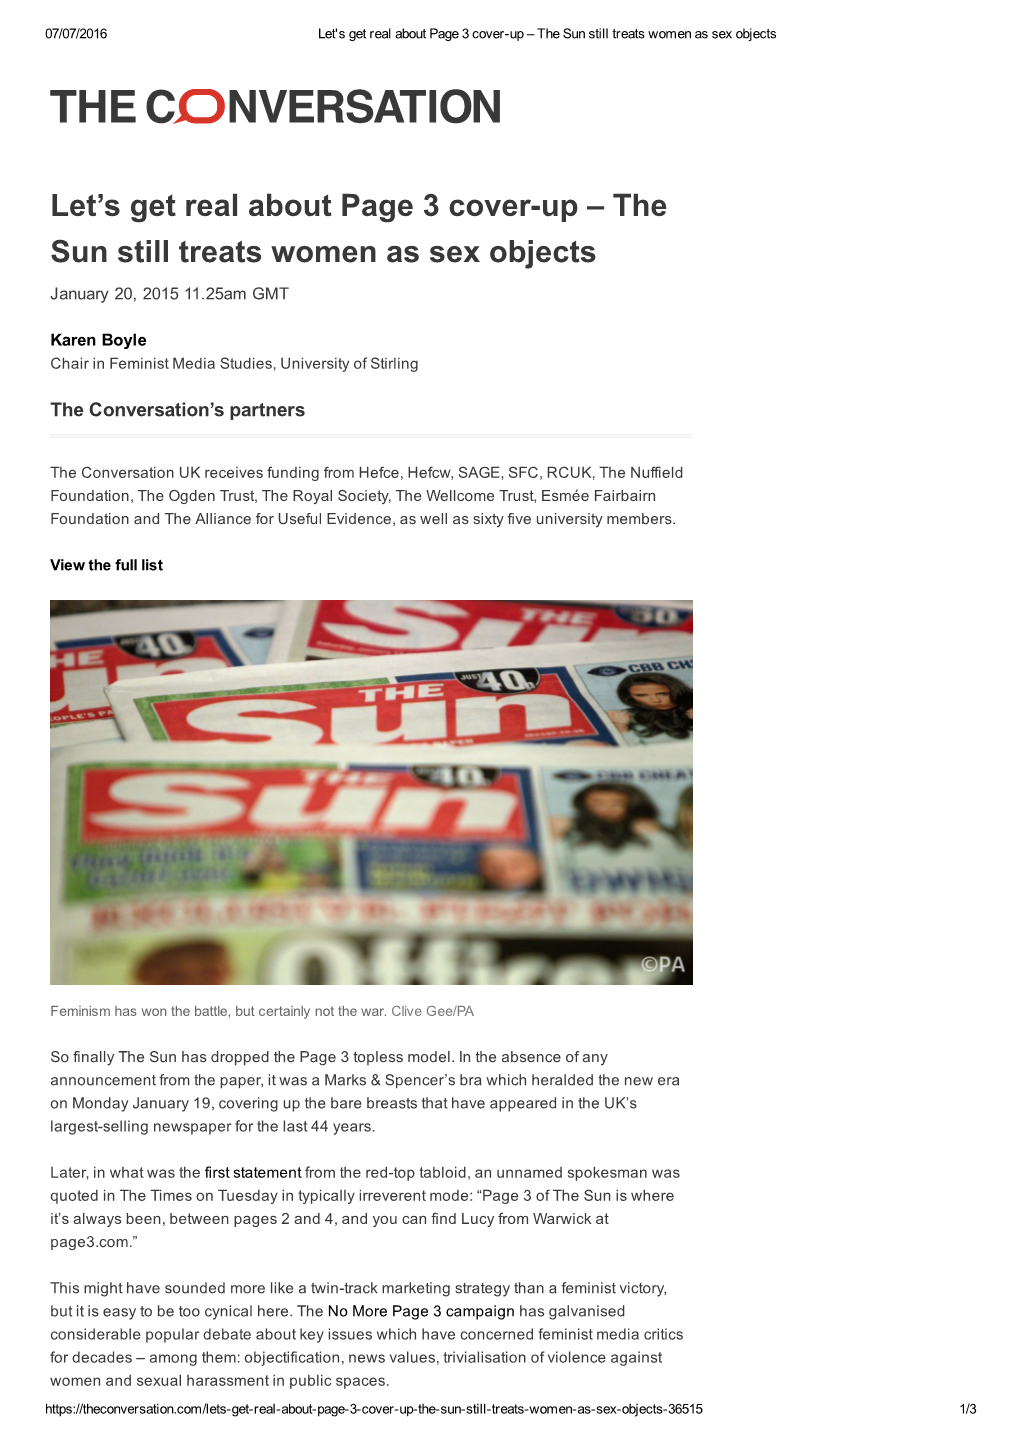 Let's Get Real About Page 3 Coverup – the Sun Still Treats Women As Sex